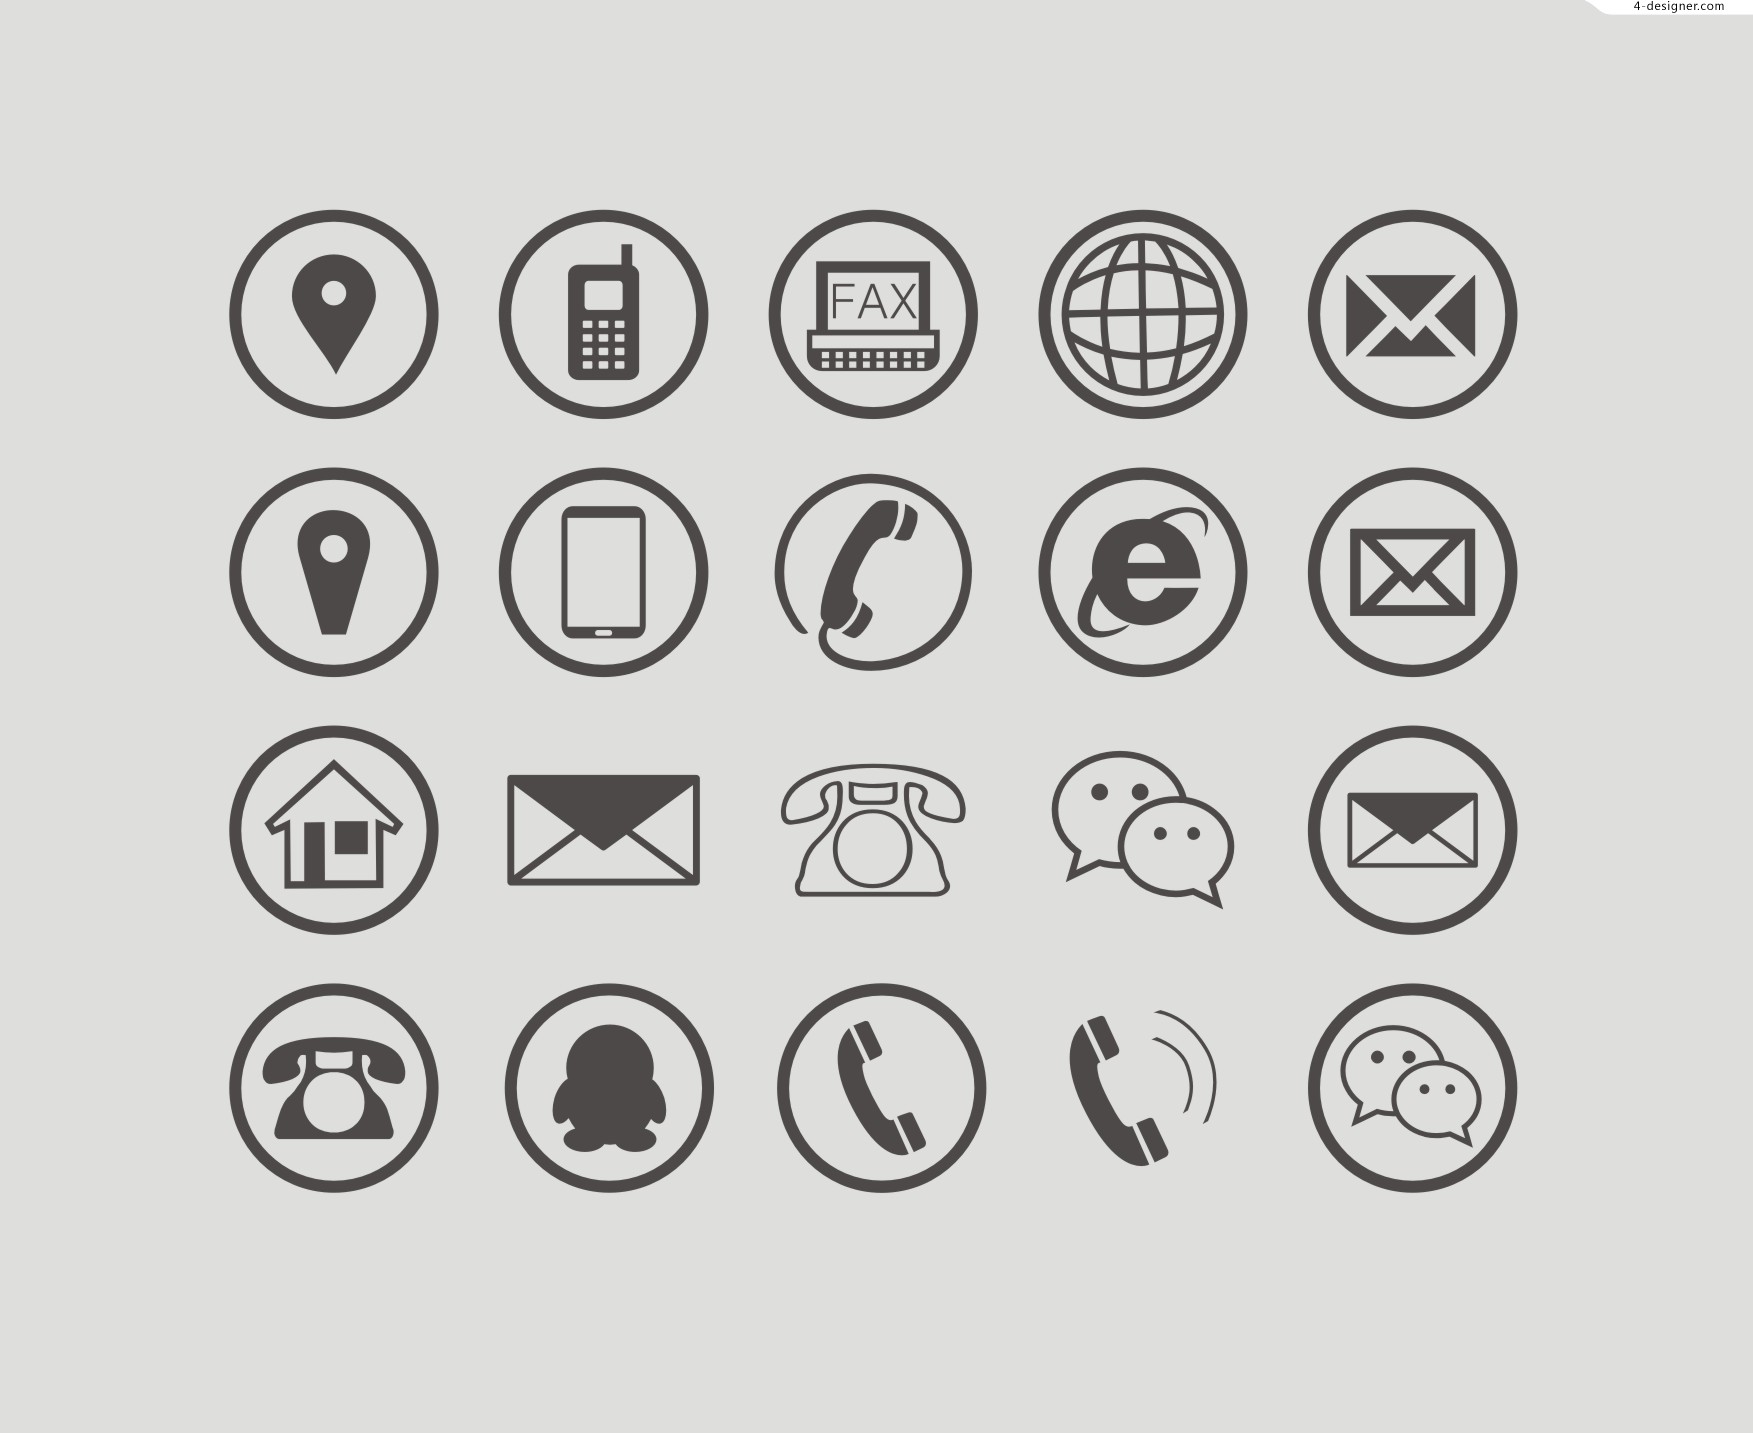 Contacts Simple Vector Icon Set Stock Vector - Illustration of 